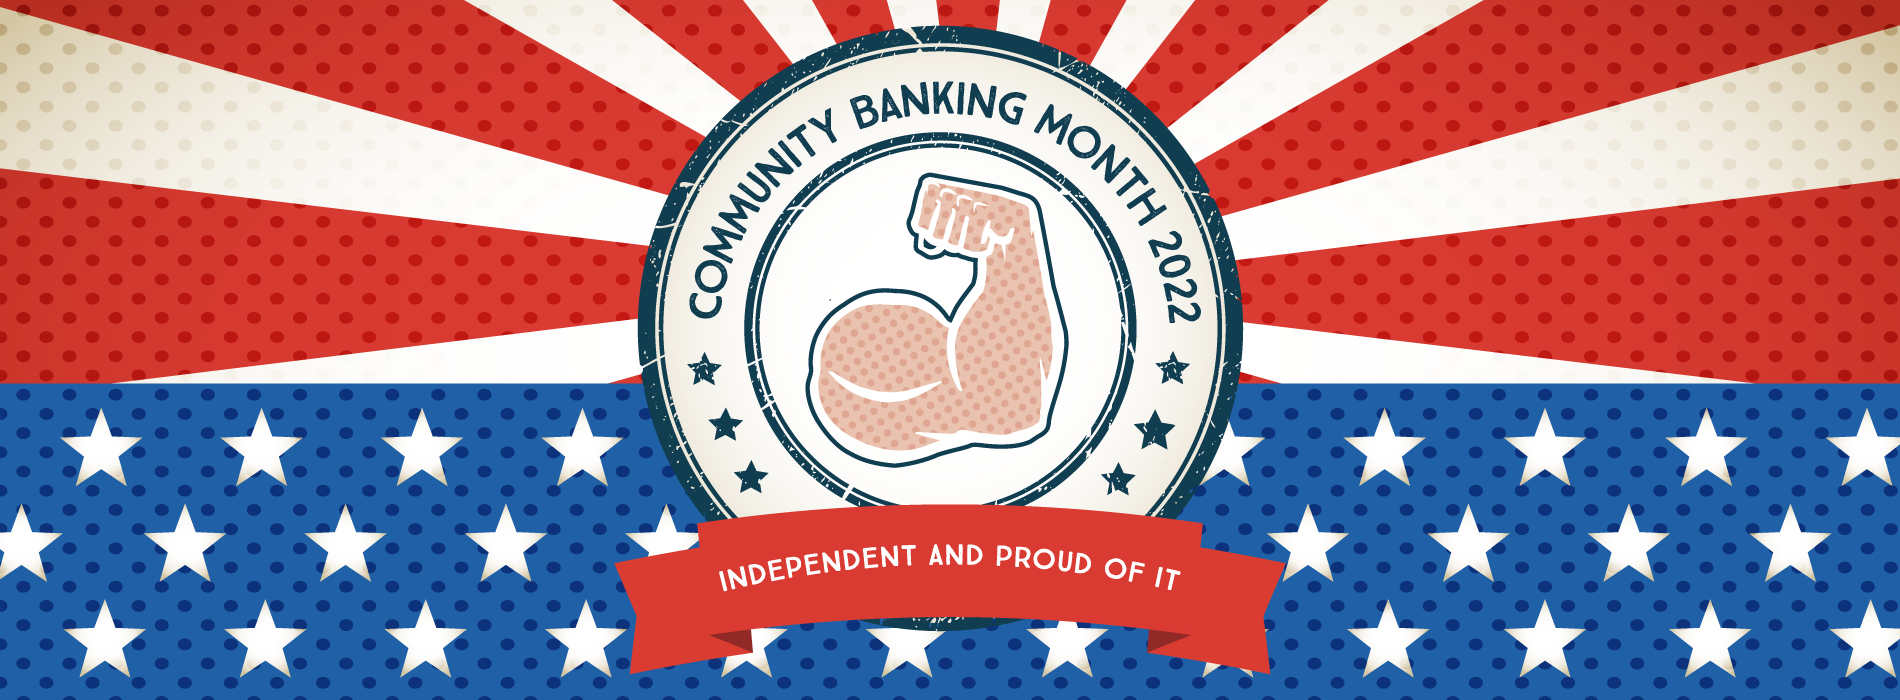 ICBSD_Community-Banking-Month_Web-Banner_1900x700